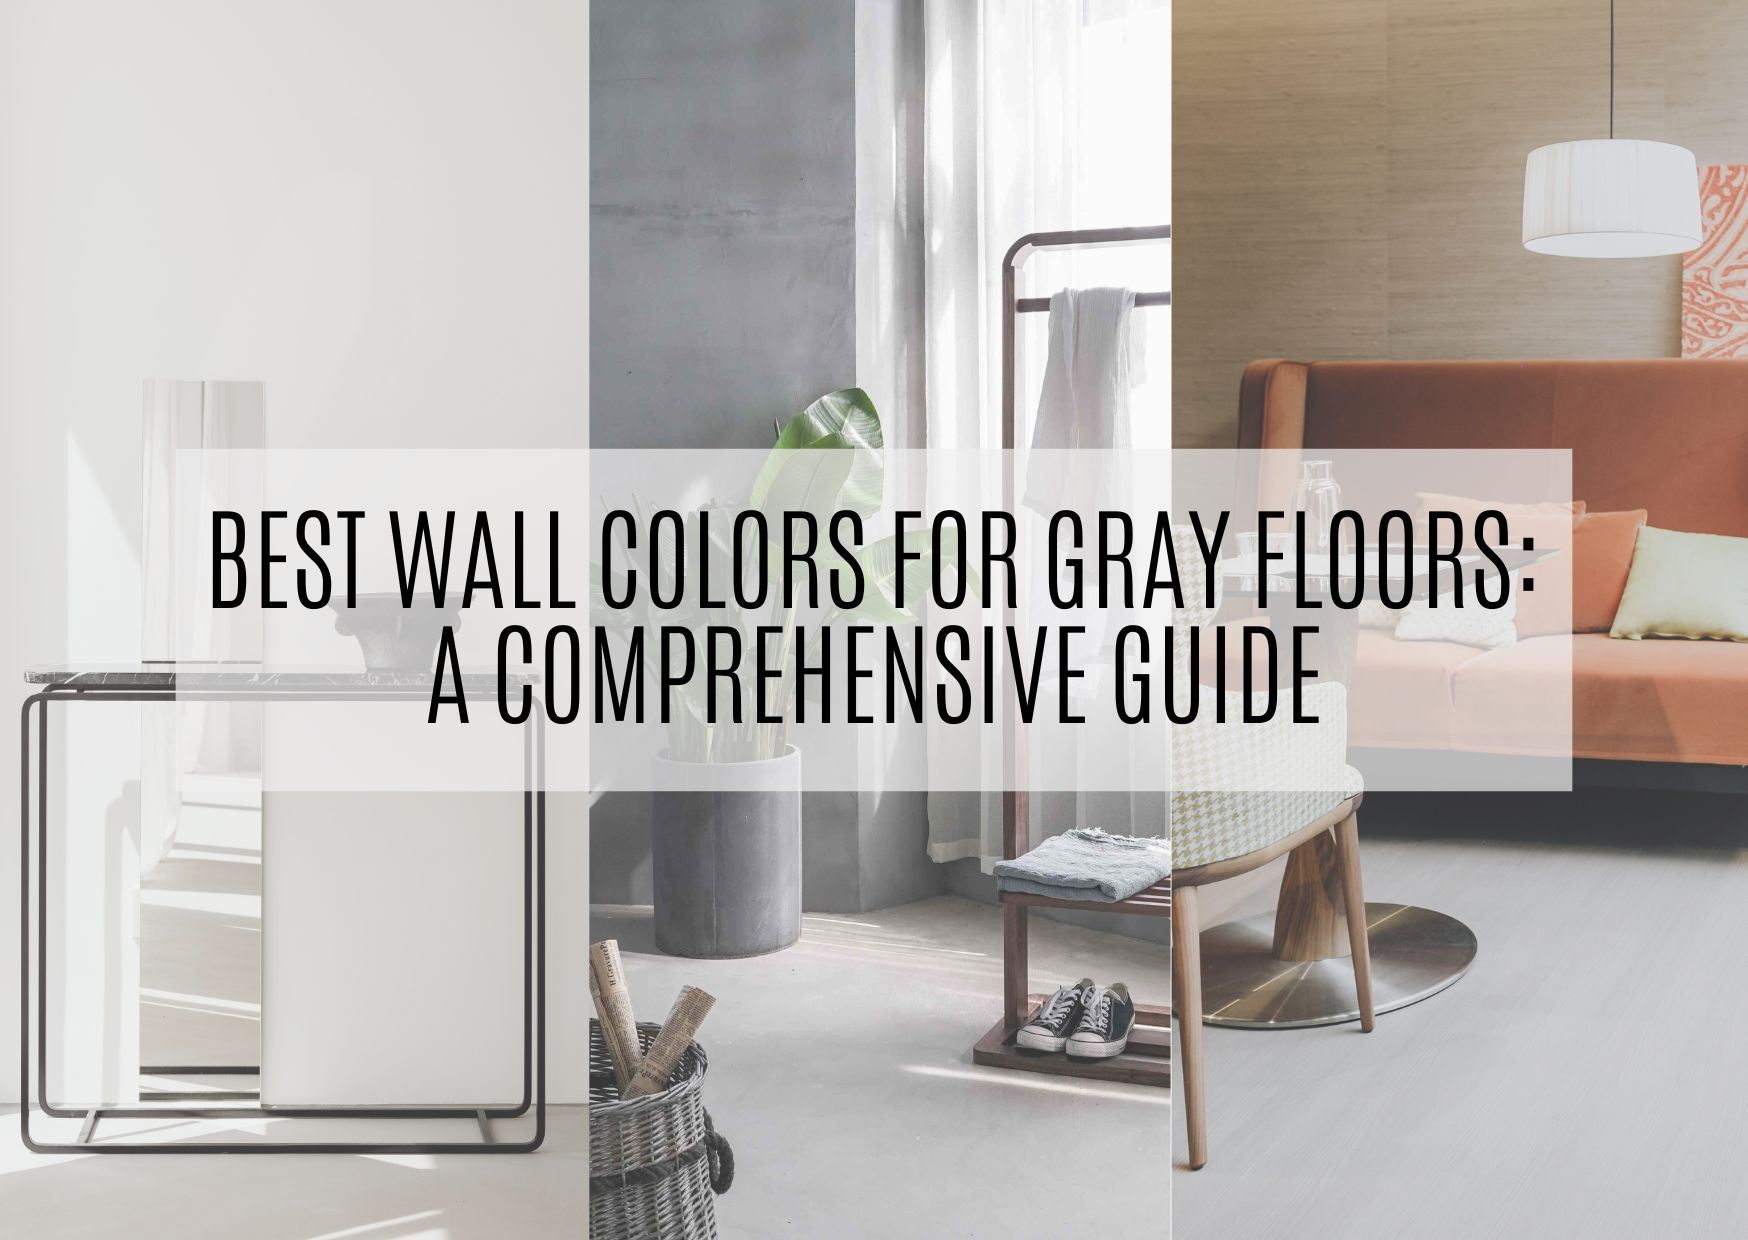 Best Wall Colors for Gray Floors A Comprehensive Guide Image